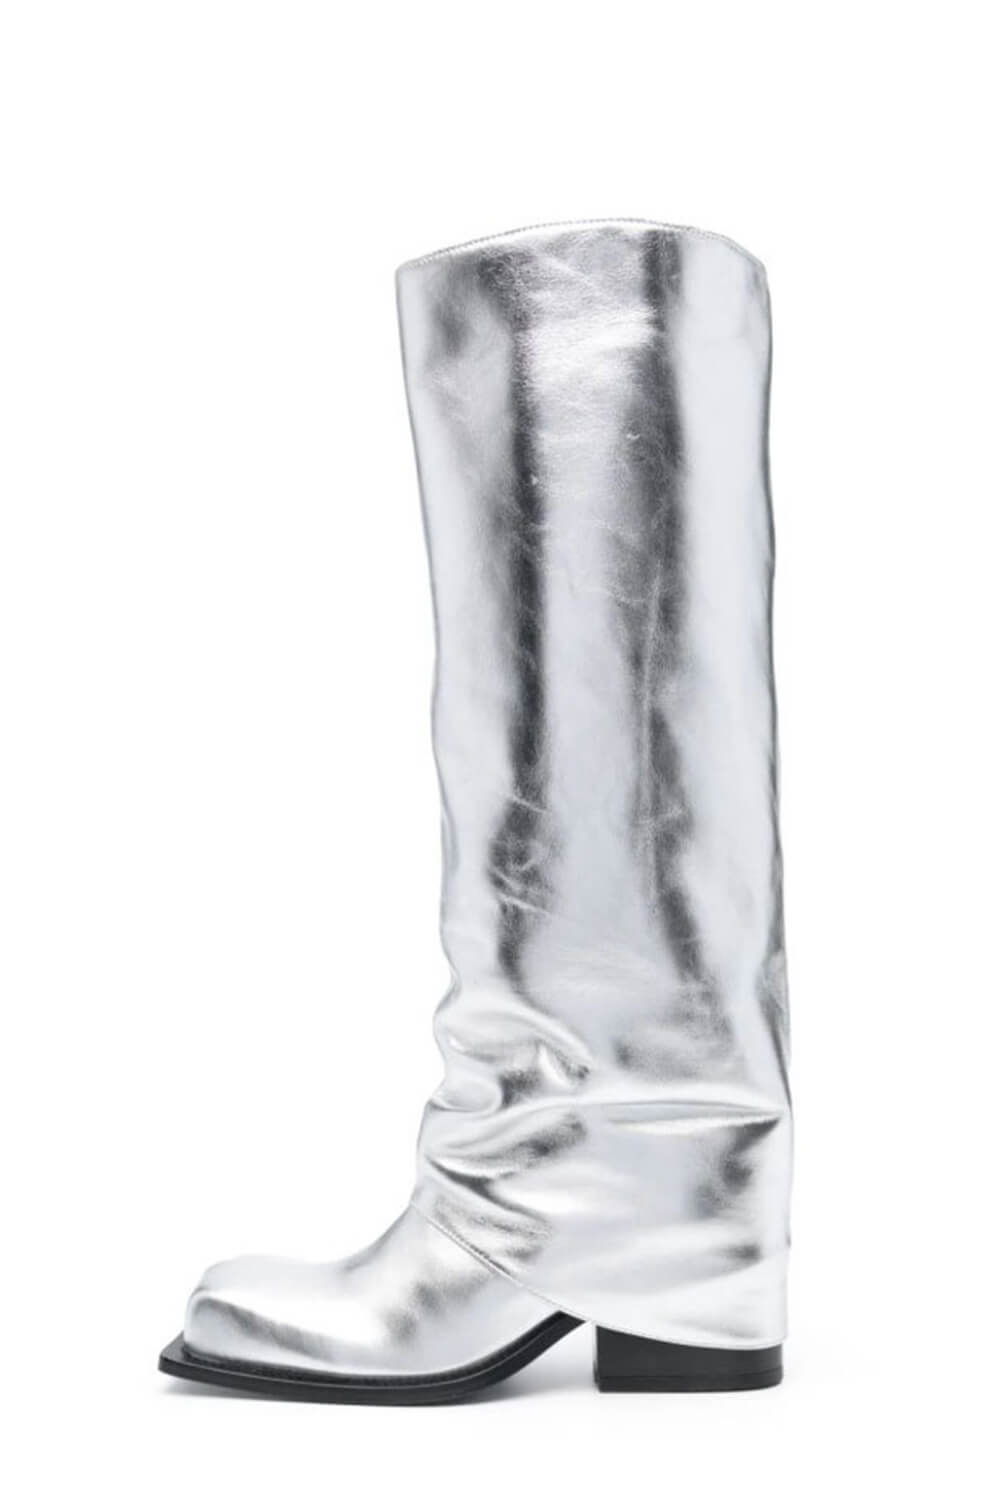 Metallic Silver Fold Over Ruched Square Toe Platform Knee High Boots